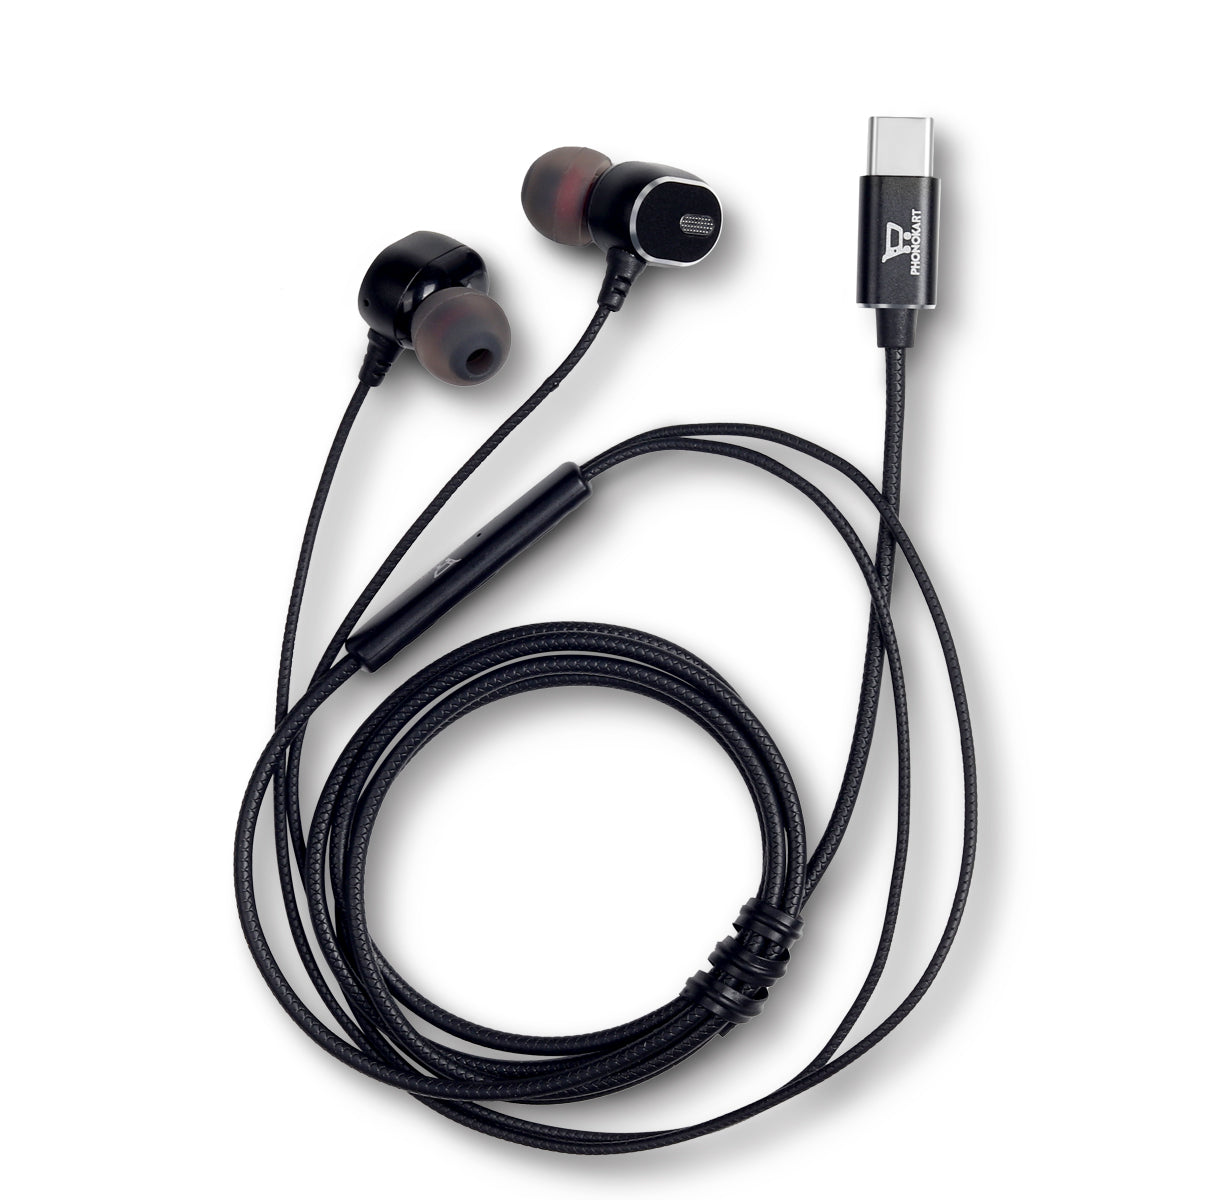 Handsfree Type C Wired Headset With Mic